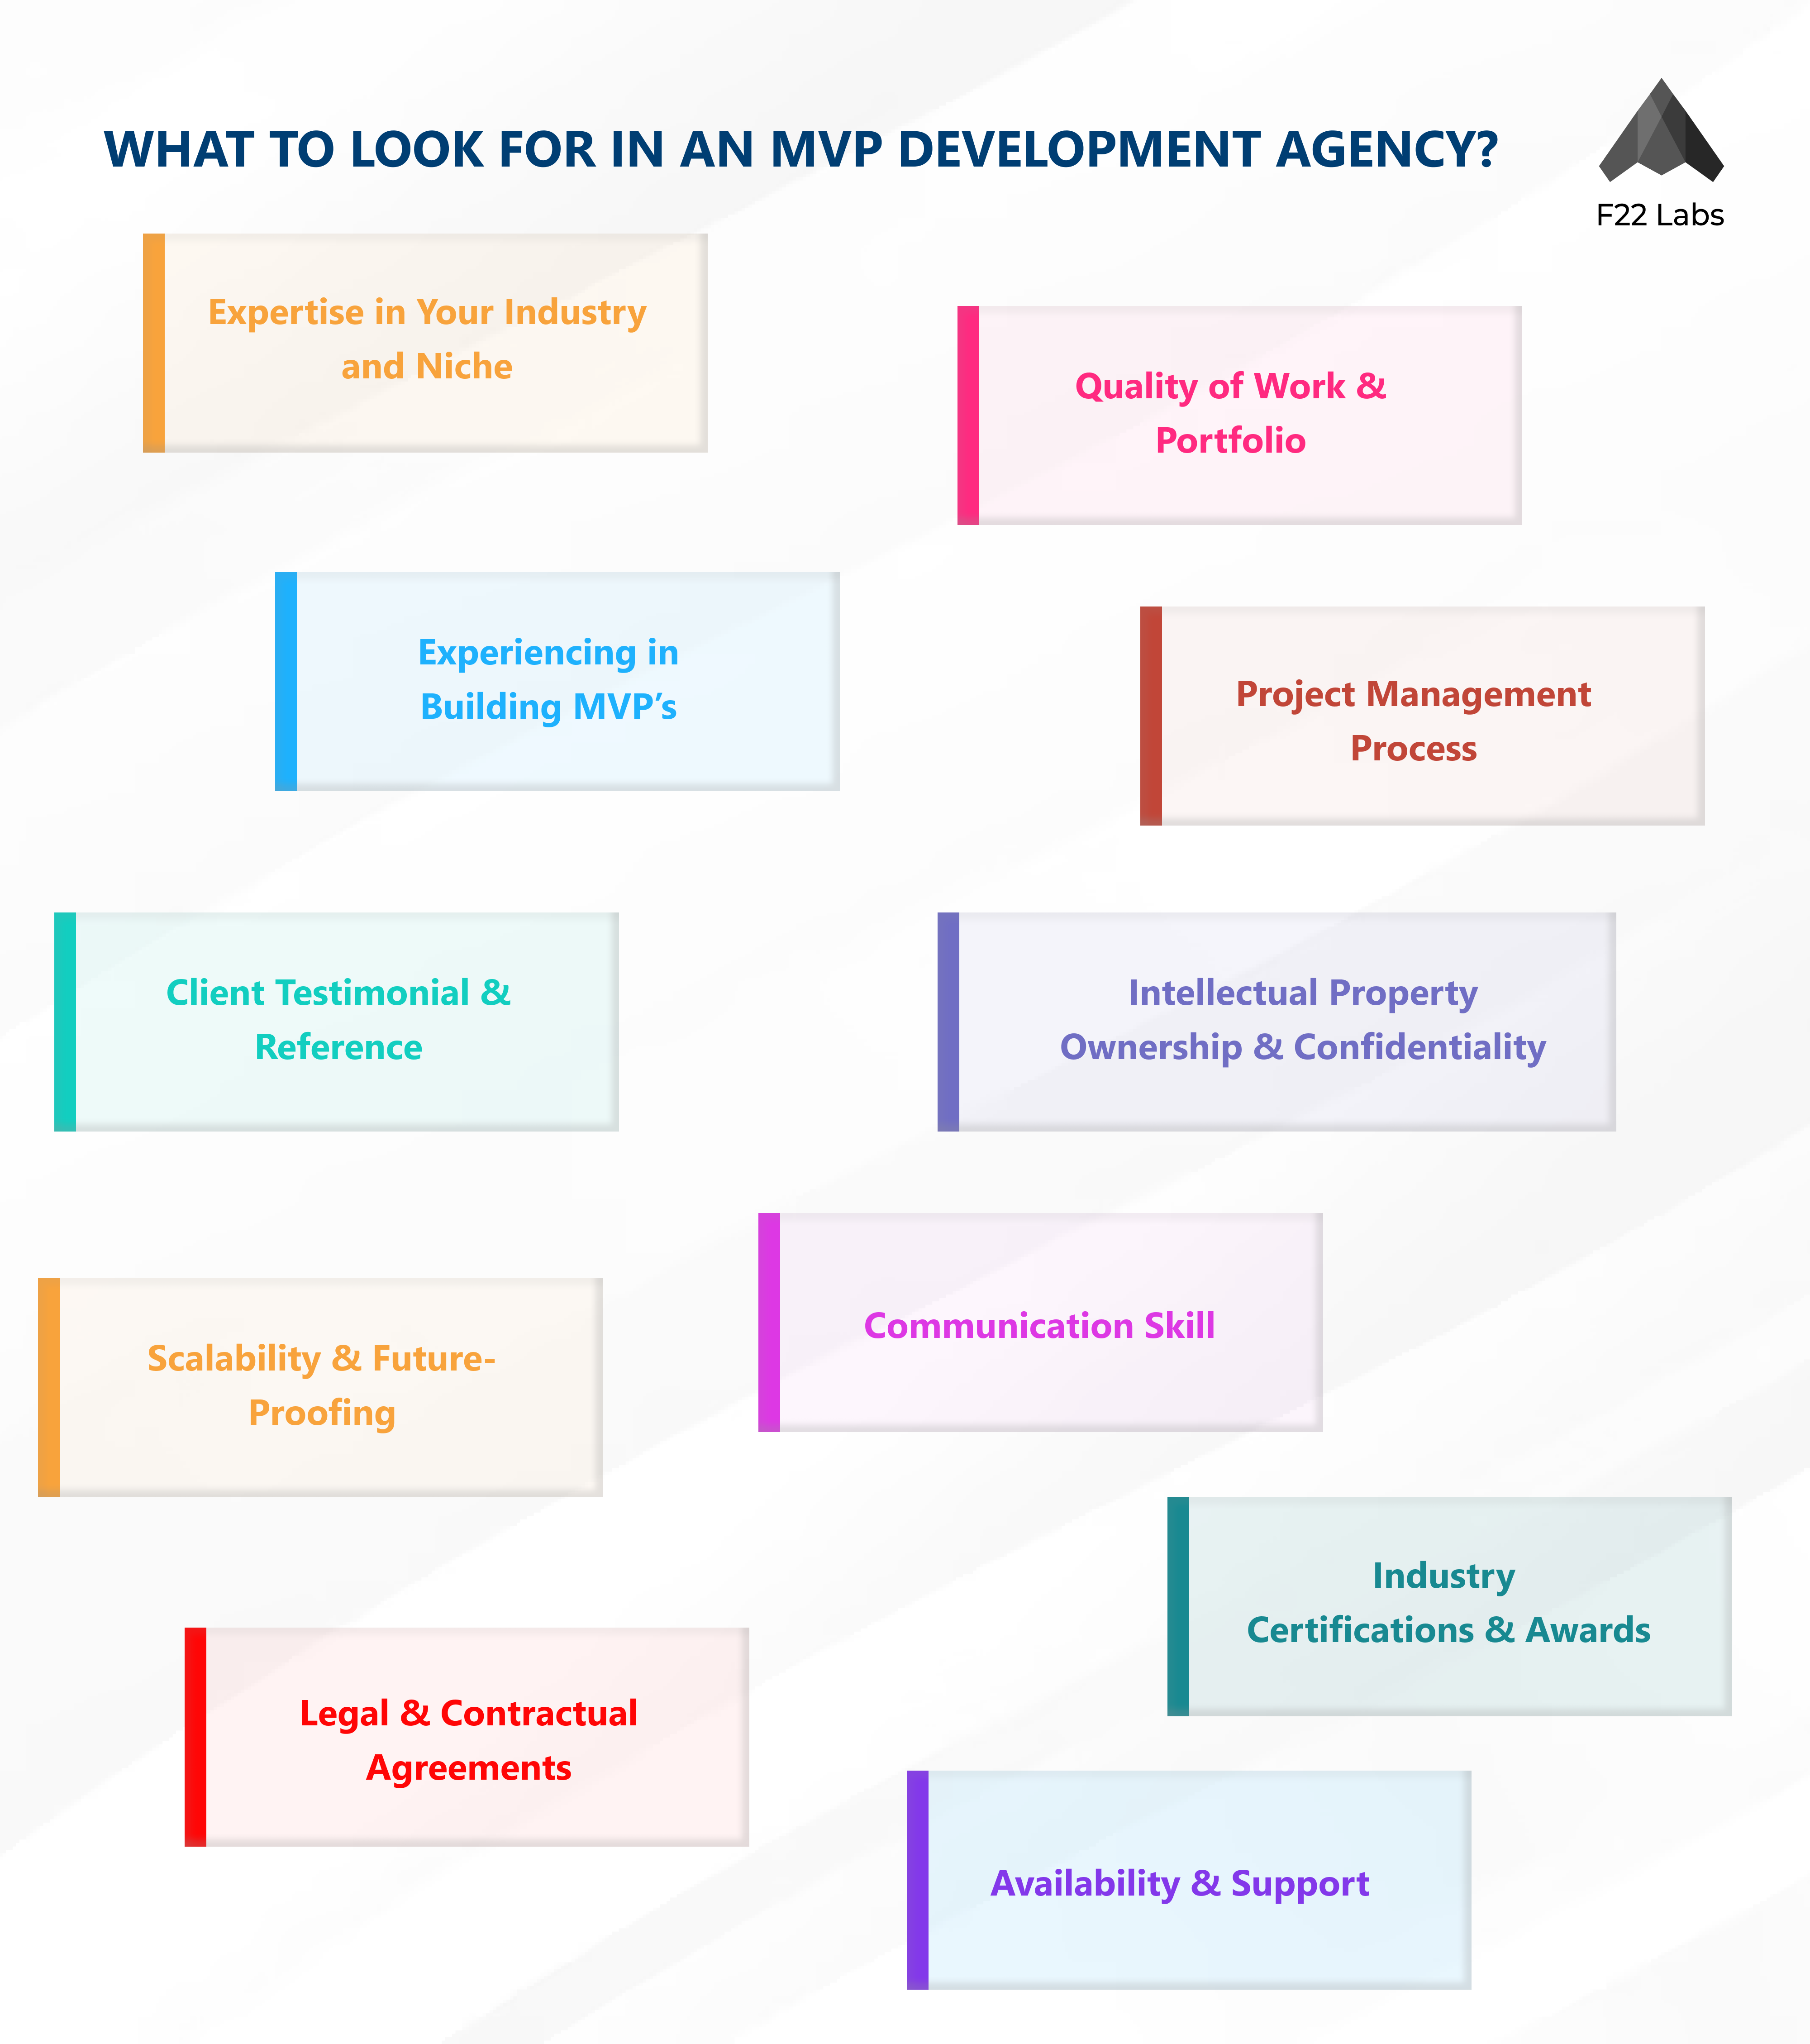 What to look for in an MVP development agency